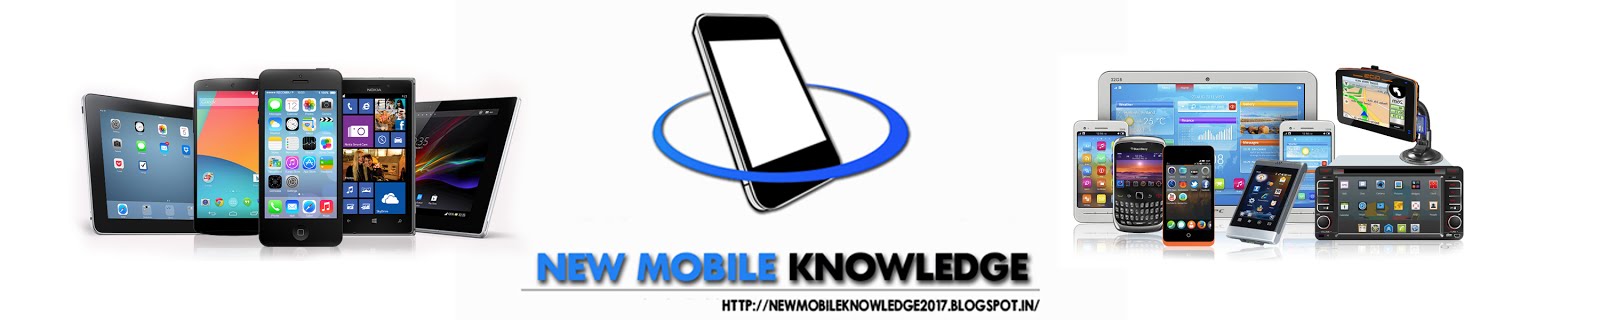 New mobile knowledge 